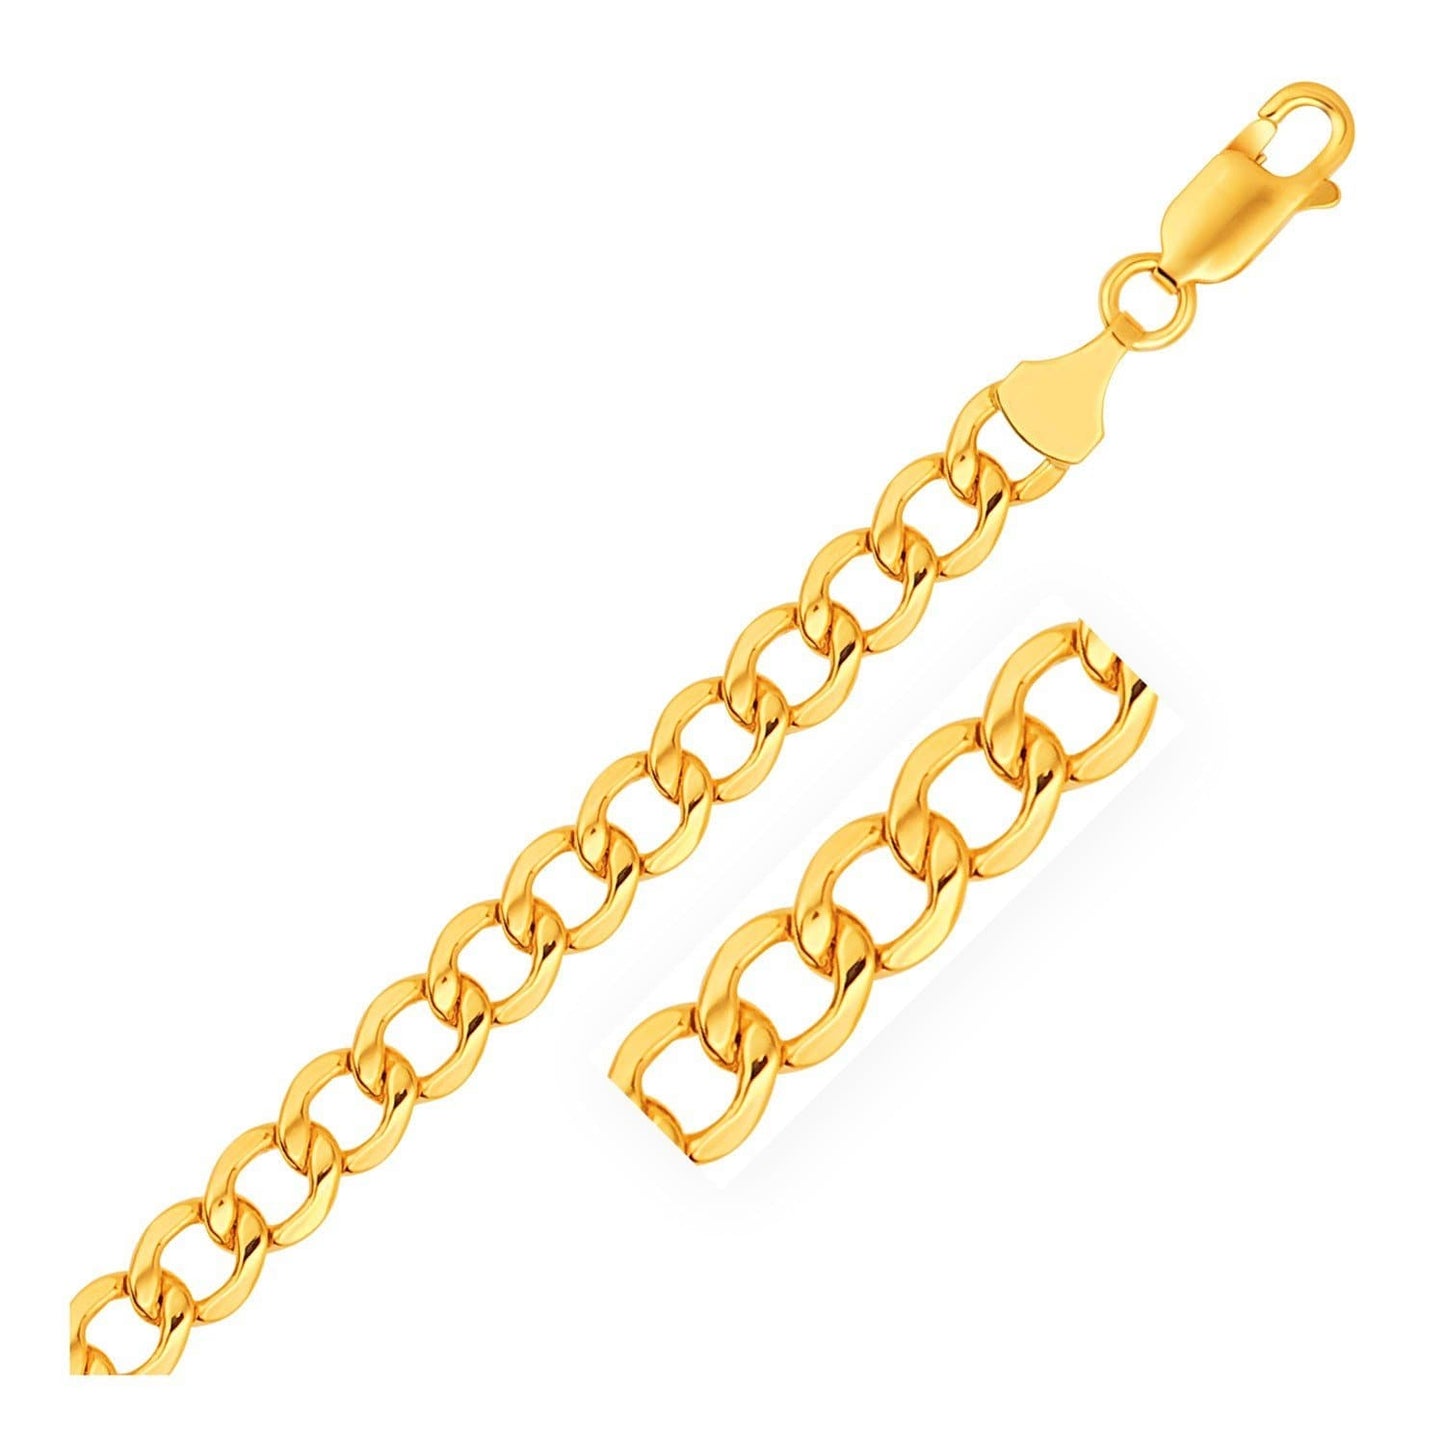 6.1mm 10k Yellow Gold Curb Chain